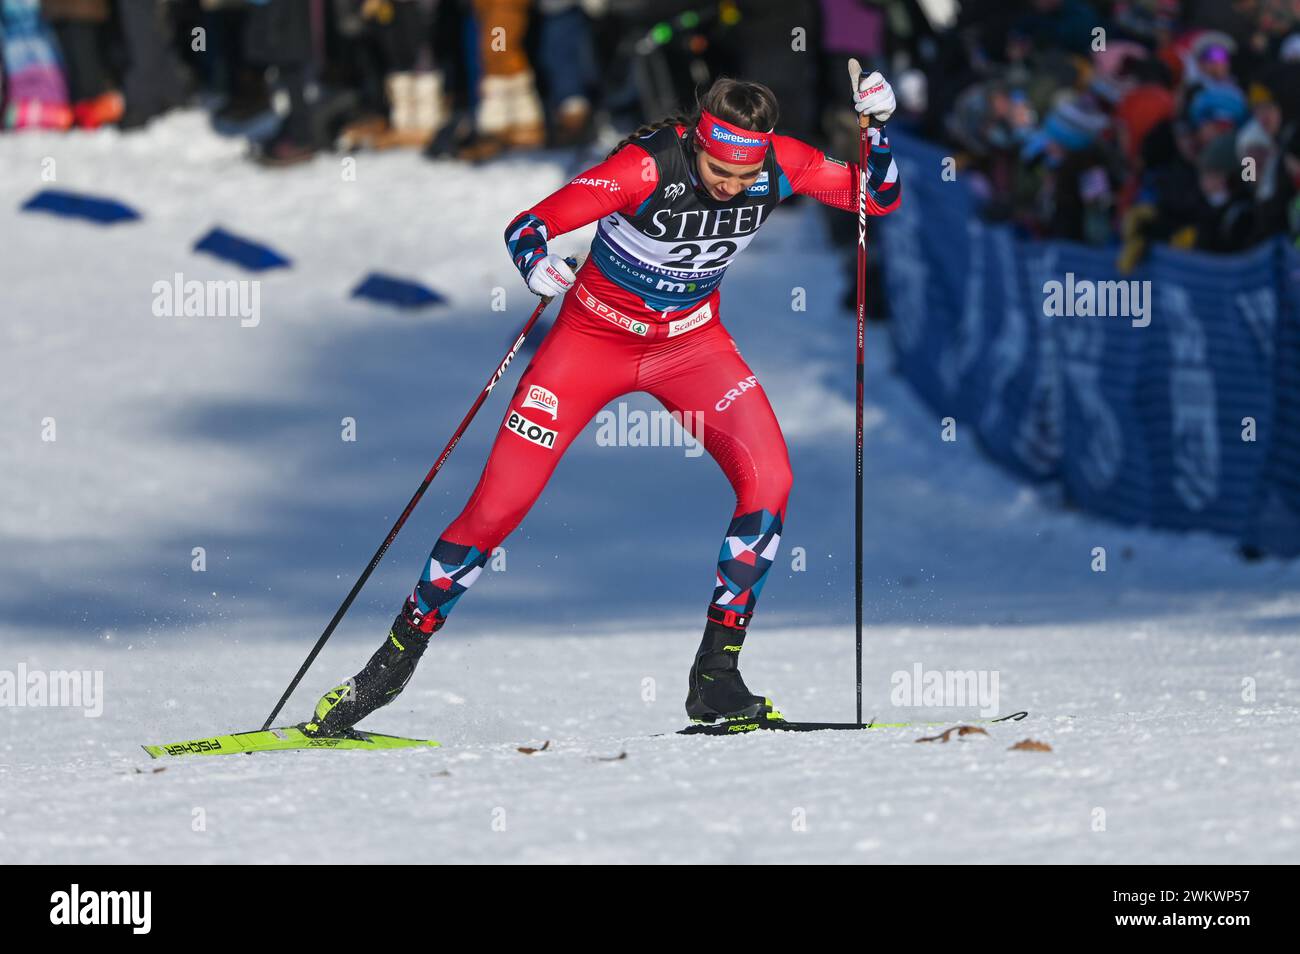 Norway's Kristine Stavås Skistad sprints at the FIS cross country ski World Cup Event at Theodore Wirth Regional Park in Minneapolis, USA, Loppet CUP Stock Photo